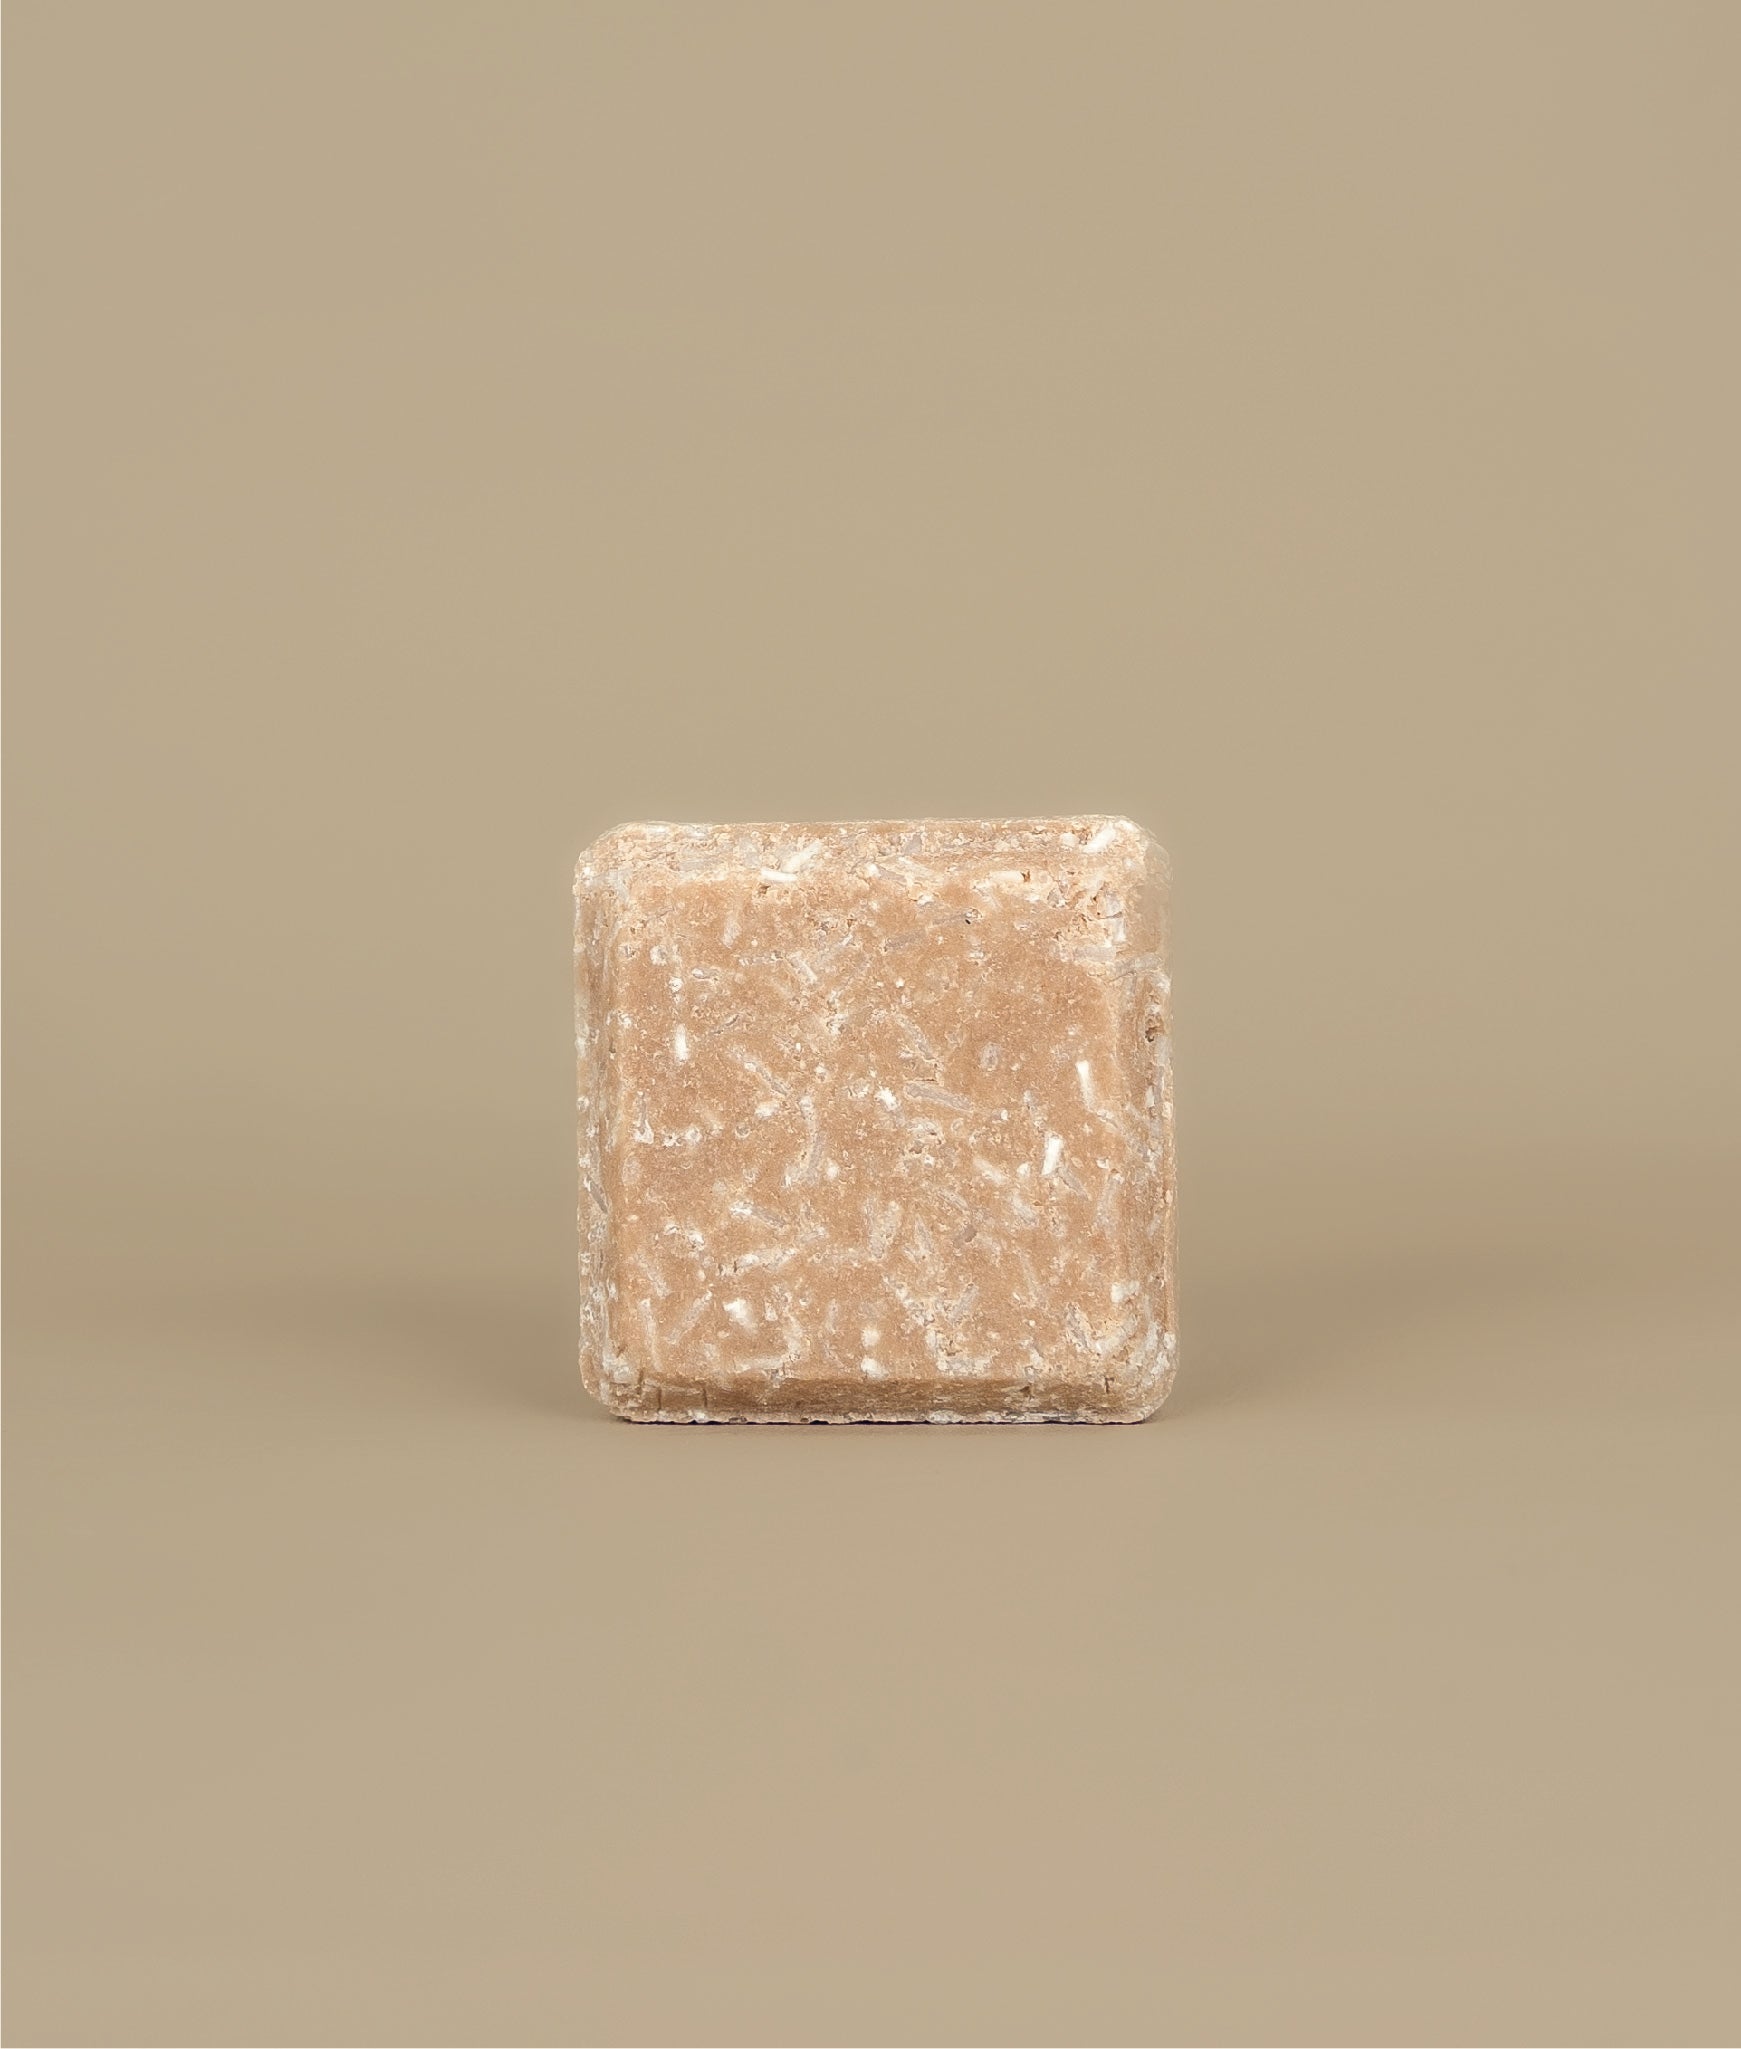 FLORAL Suds Shampoo Bar | normal to dry hair + curls